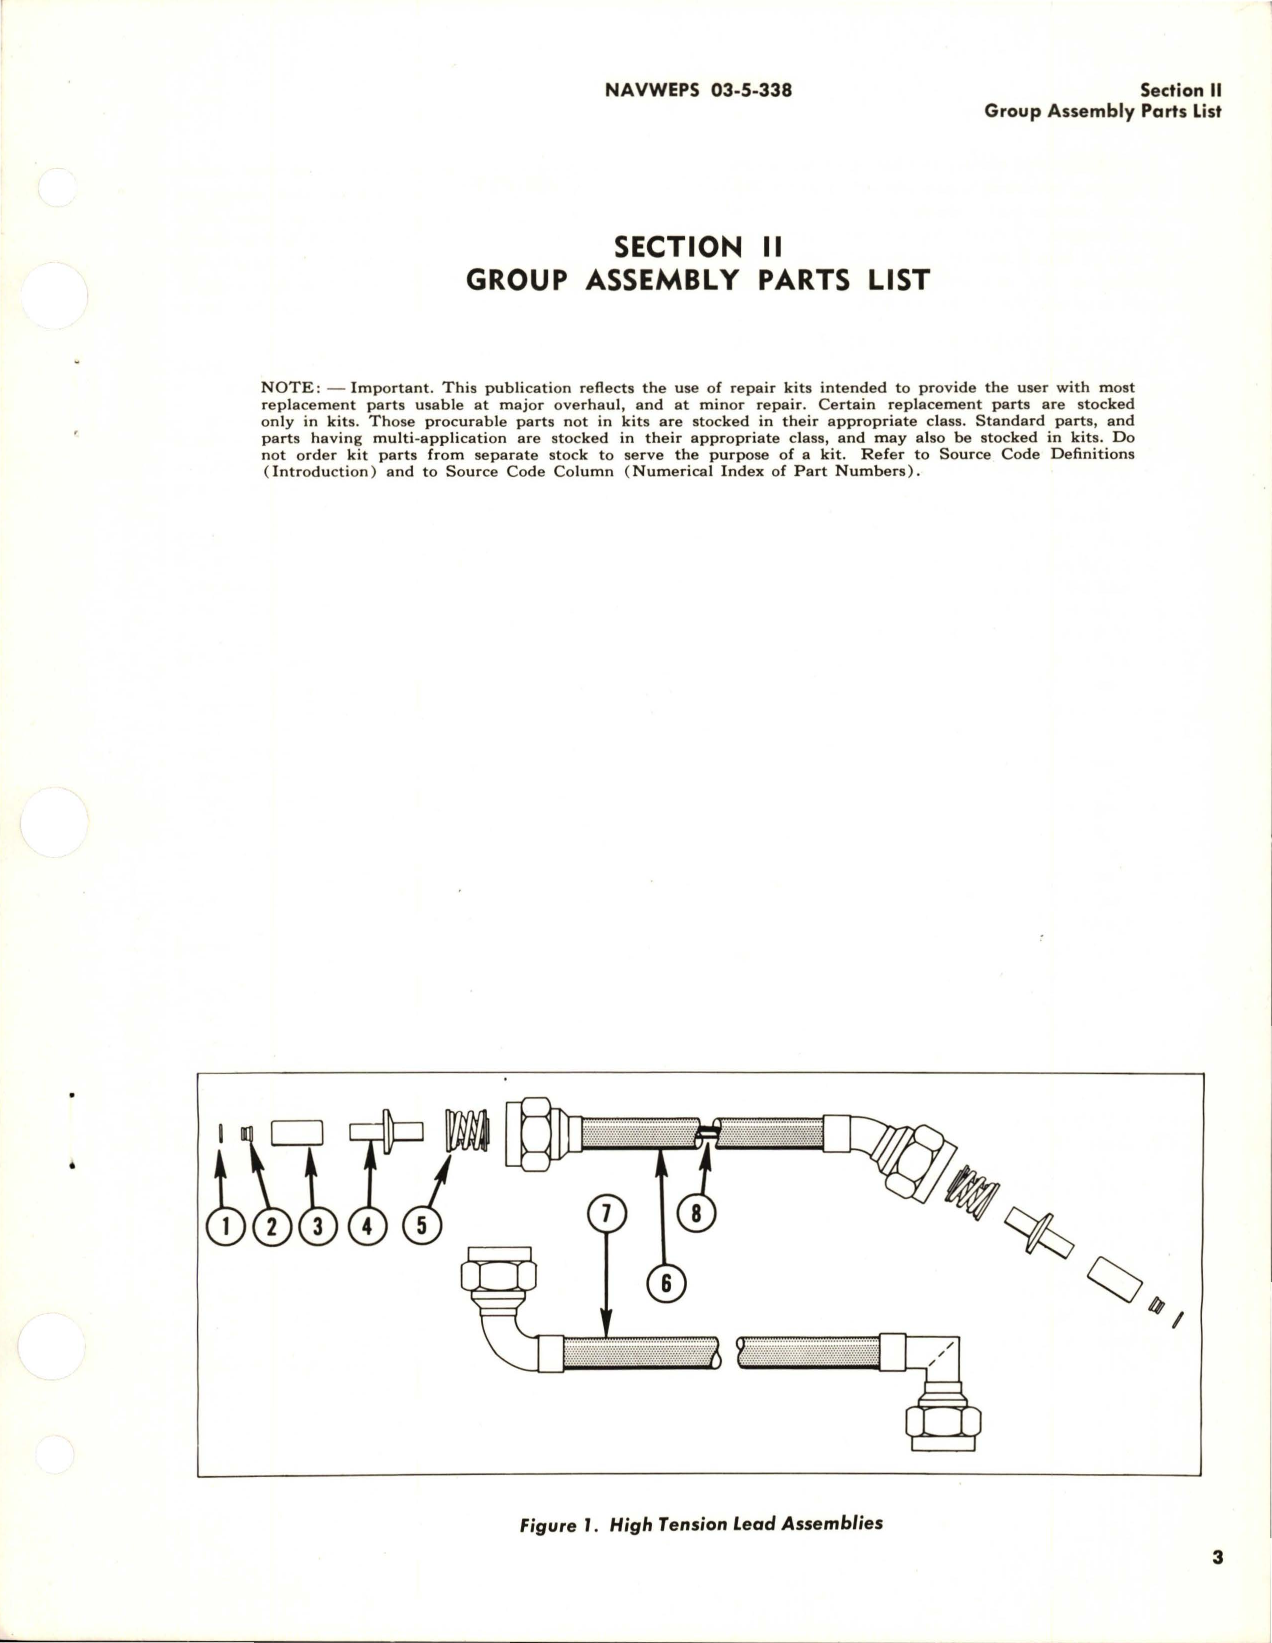 Sample page 5 from AirCorps Library document: Illustrated Parts Breakdown for Ignition Leads and Wiring Harnesses